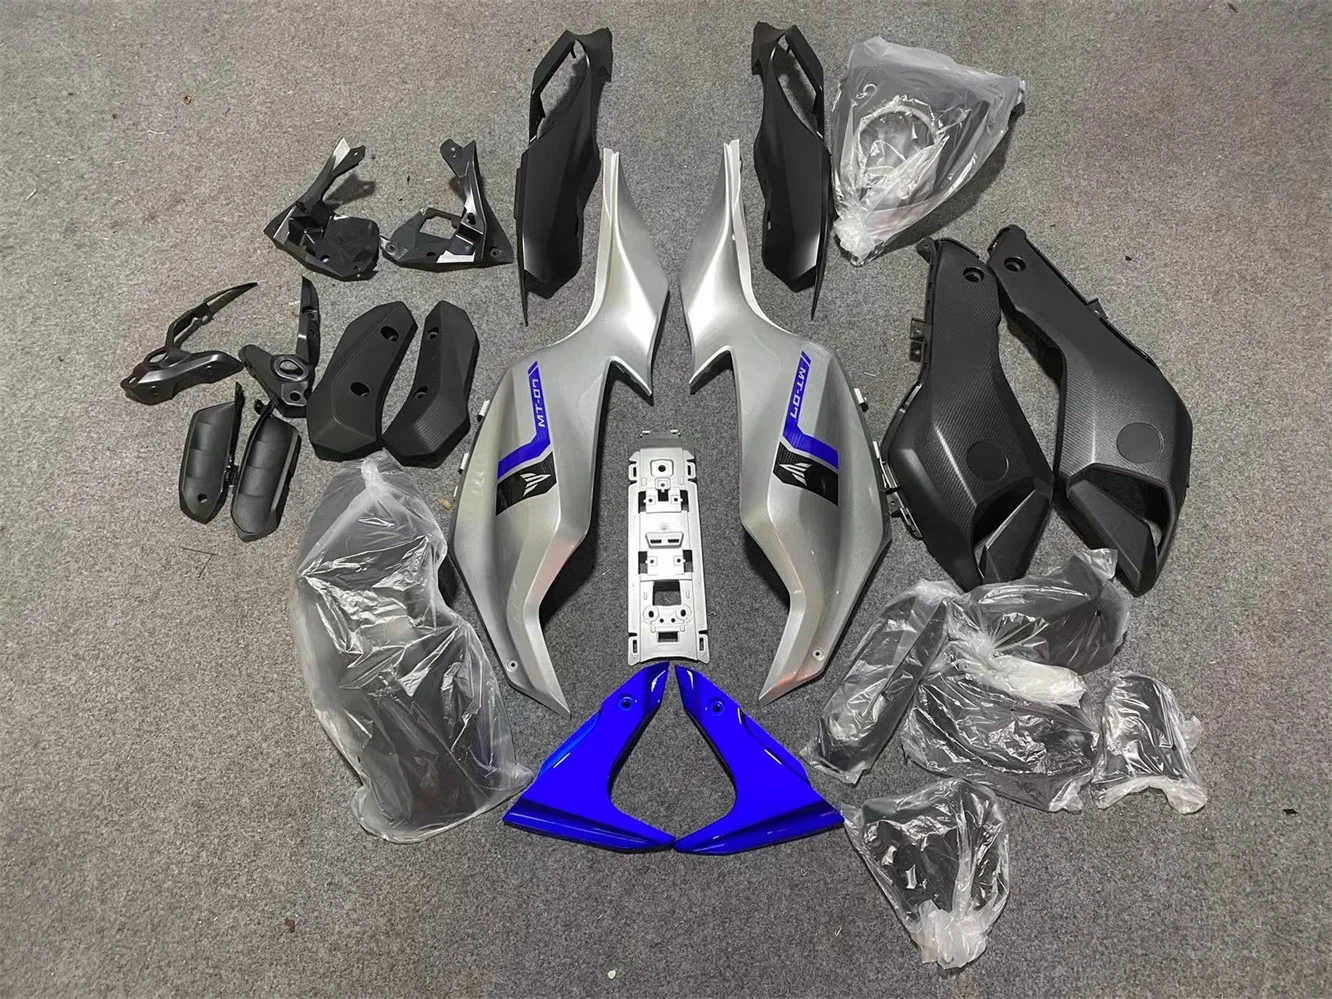 

ABS Injection Full Fairing Body Kit Fit For 2012-2017 For Yamaha MT07 FZ07 MT-07 Set MT 07 FZ 07 2013-2017 Silvery blue